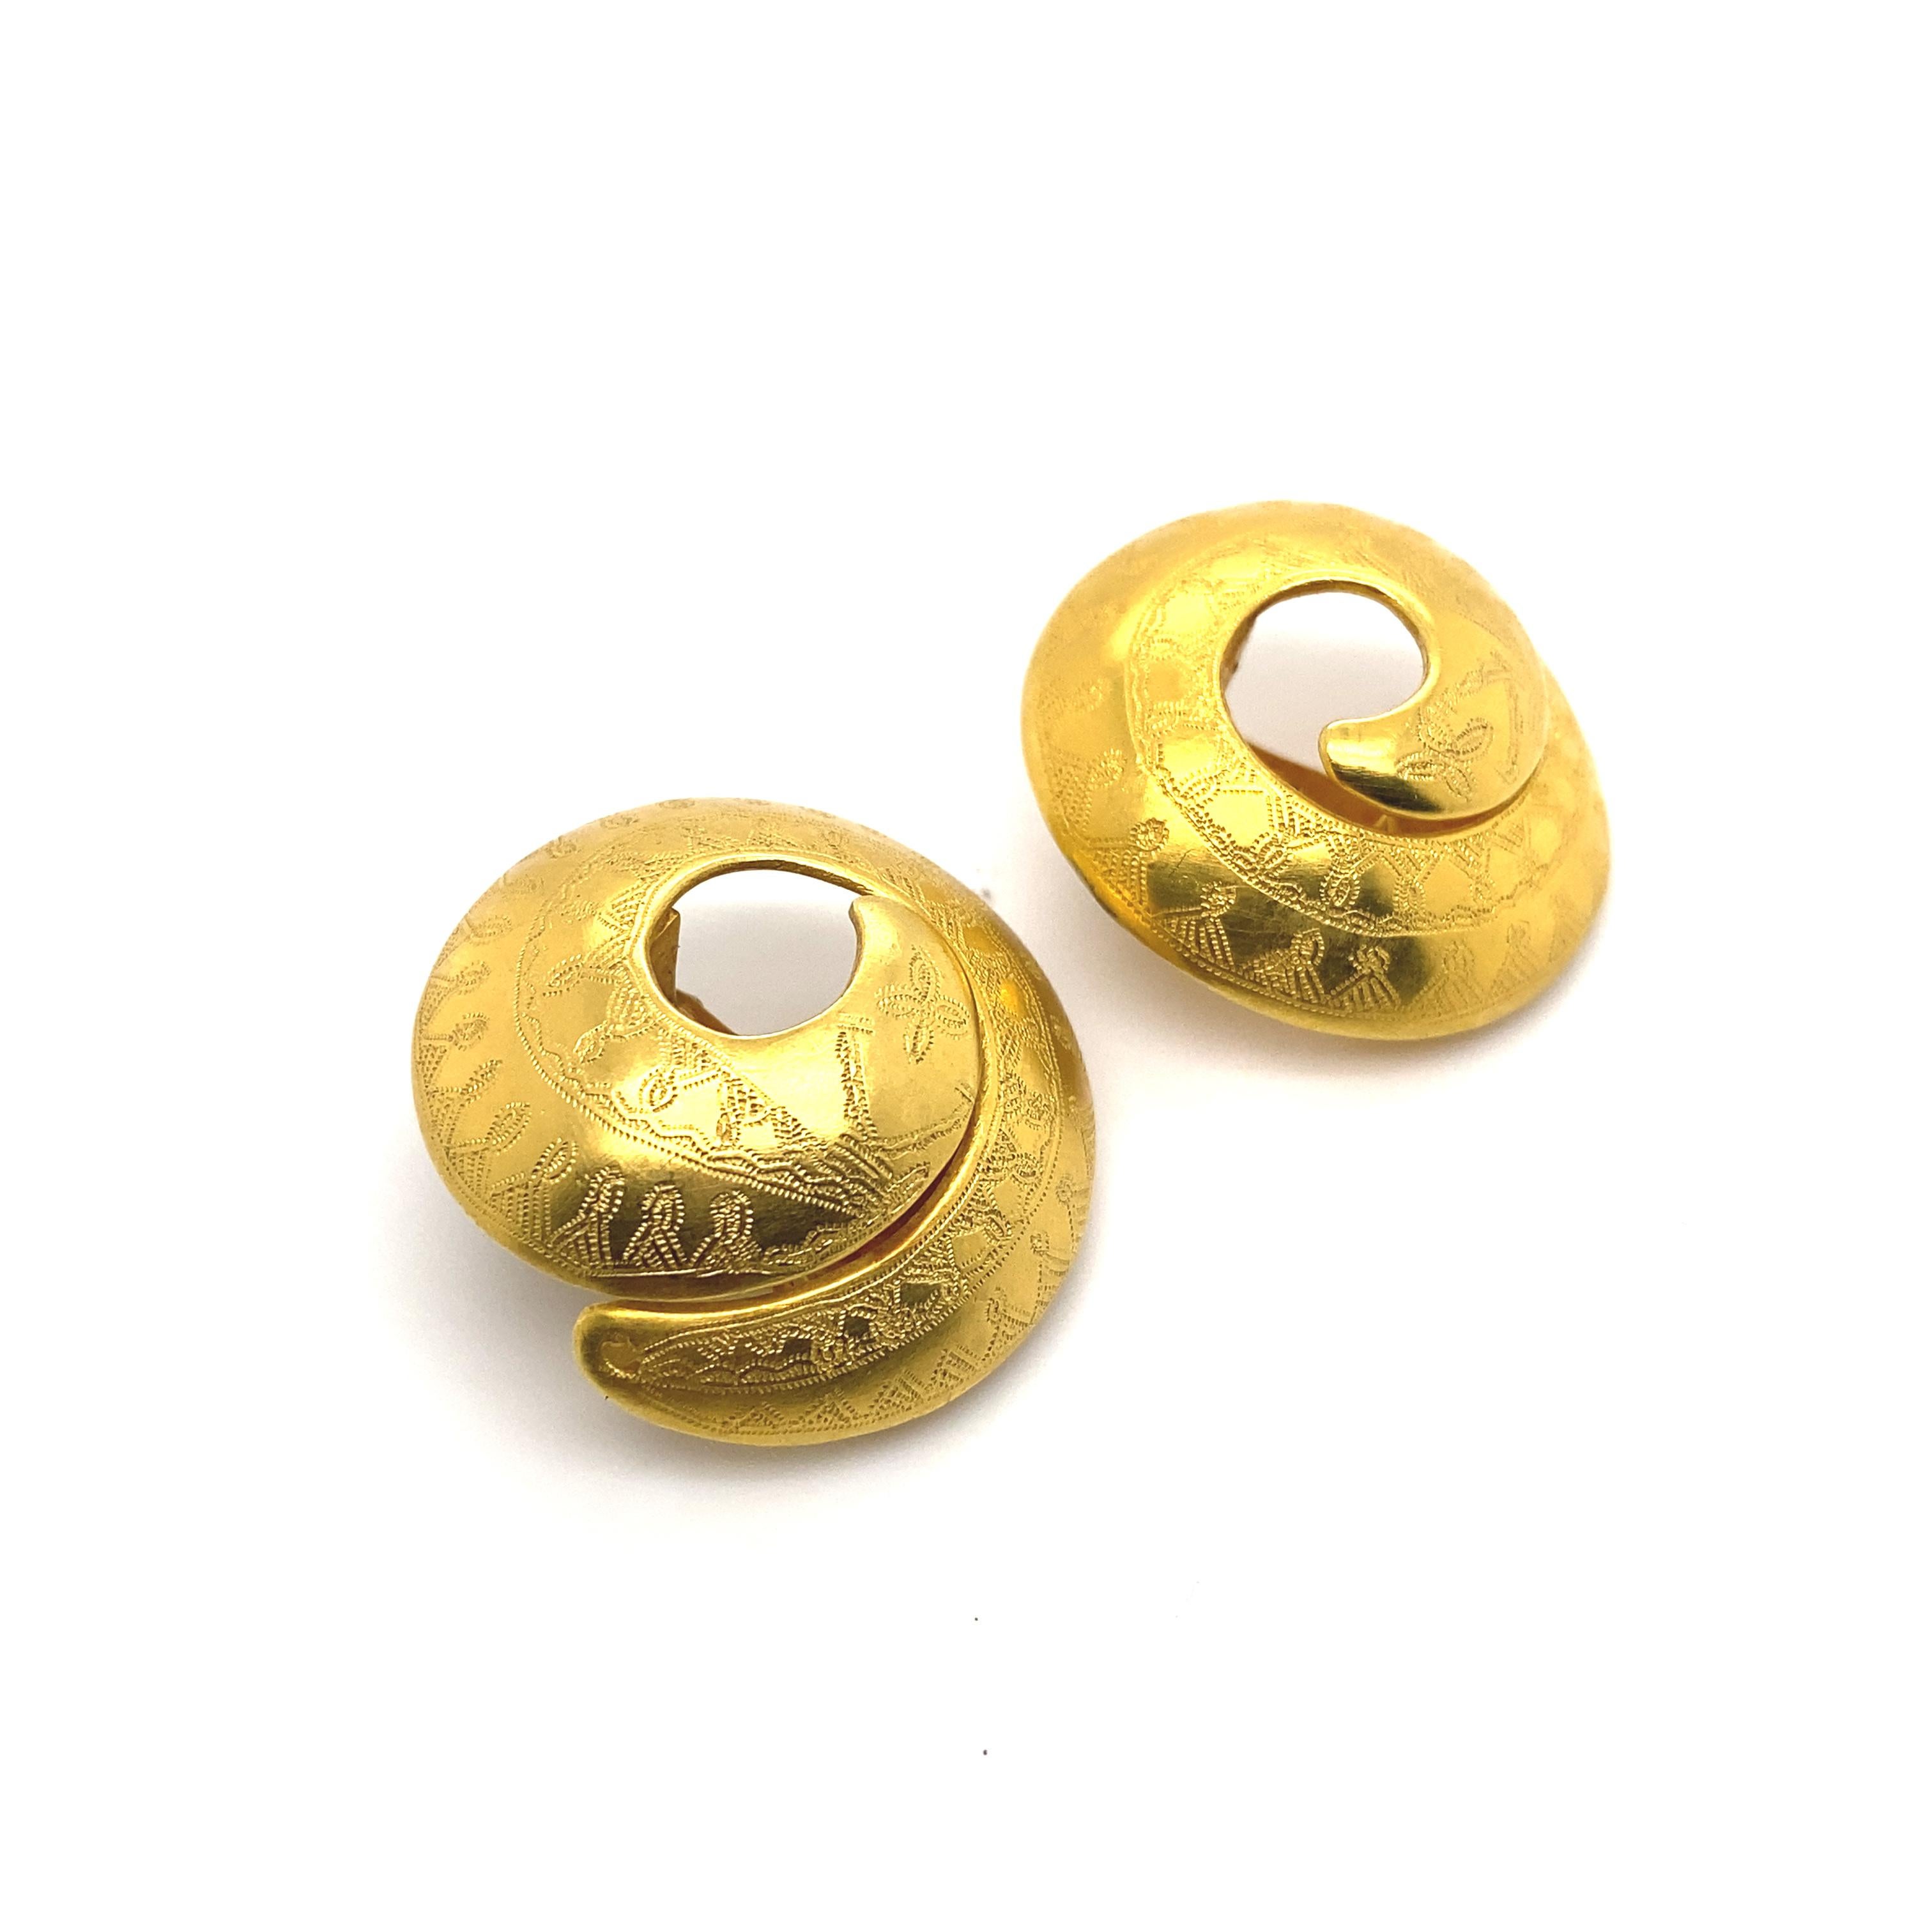 A retro pair of Hermès shell earrings in 18 karat yellow gold, circa 1950.

This rare and unusual retro pair of Hermès earrings each feature an elegant swirl which is textured throughout with an intricately hand applied design secured to the reverse